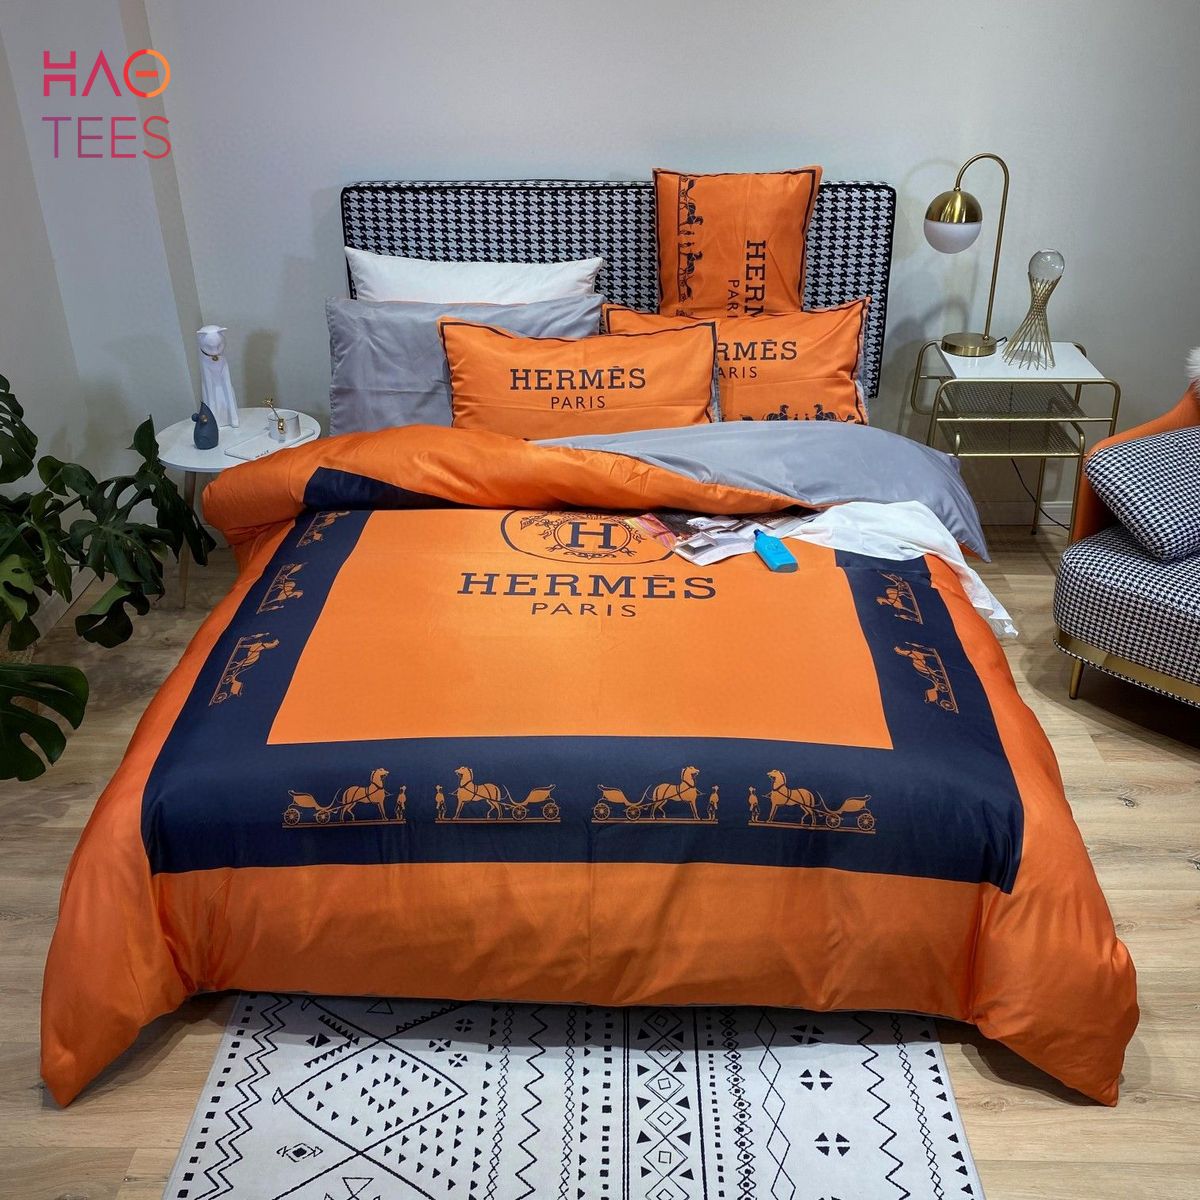 Hermes Paris Luxury Brand Bedding Sets And Bedroom Set Limited Edition